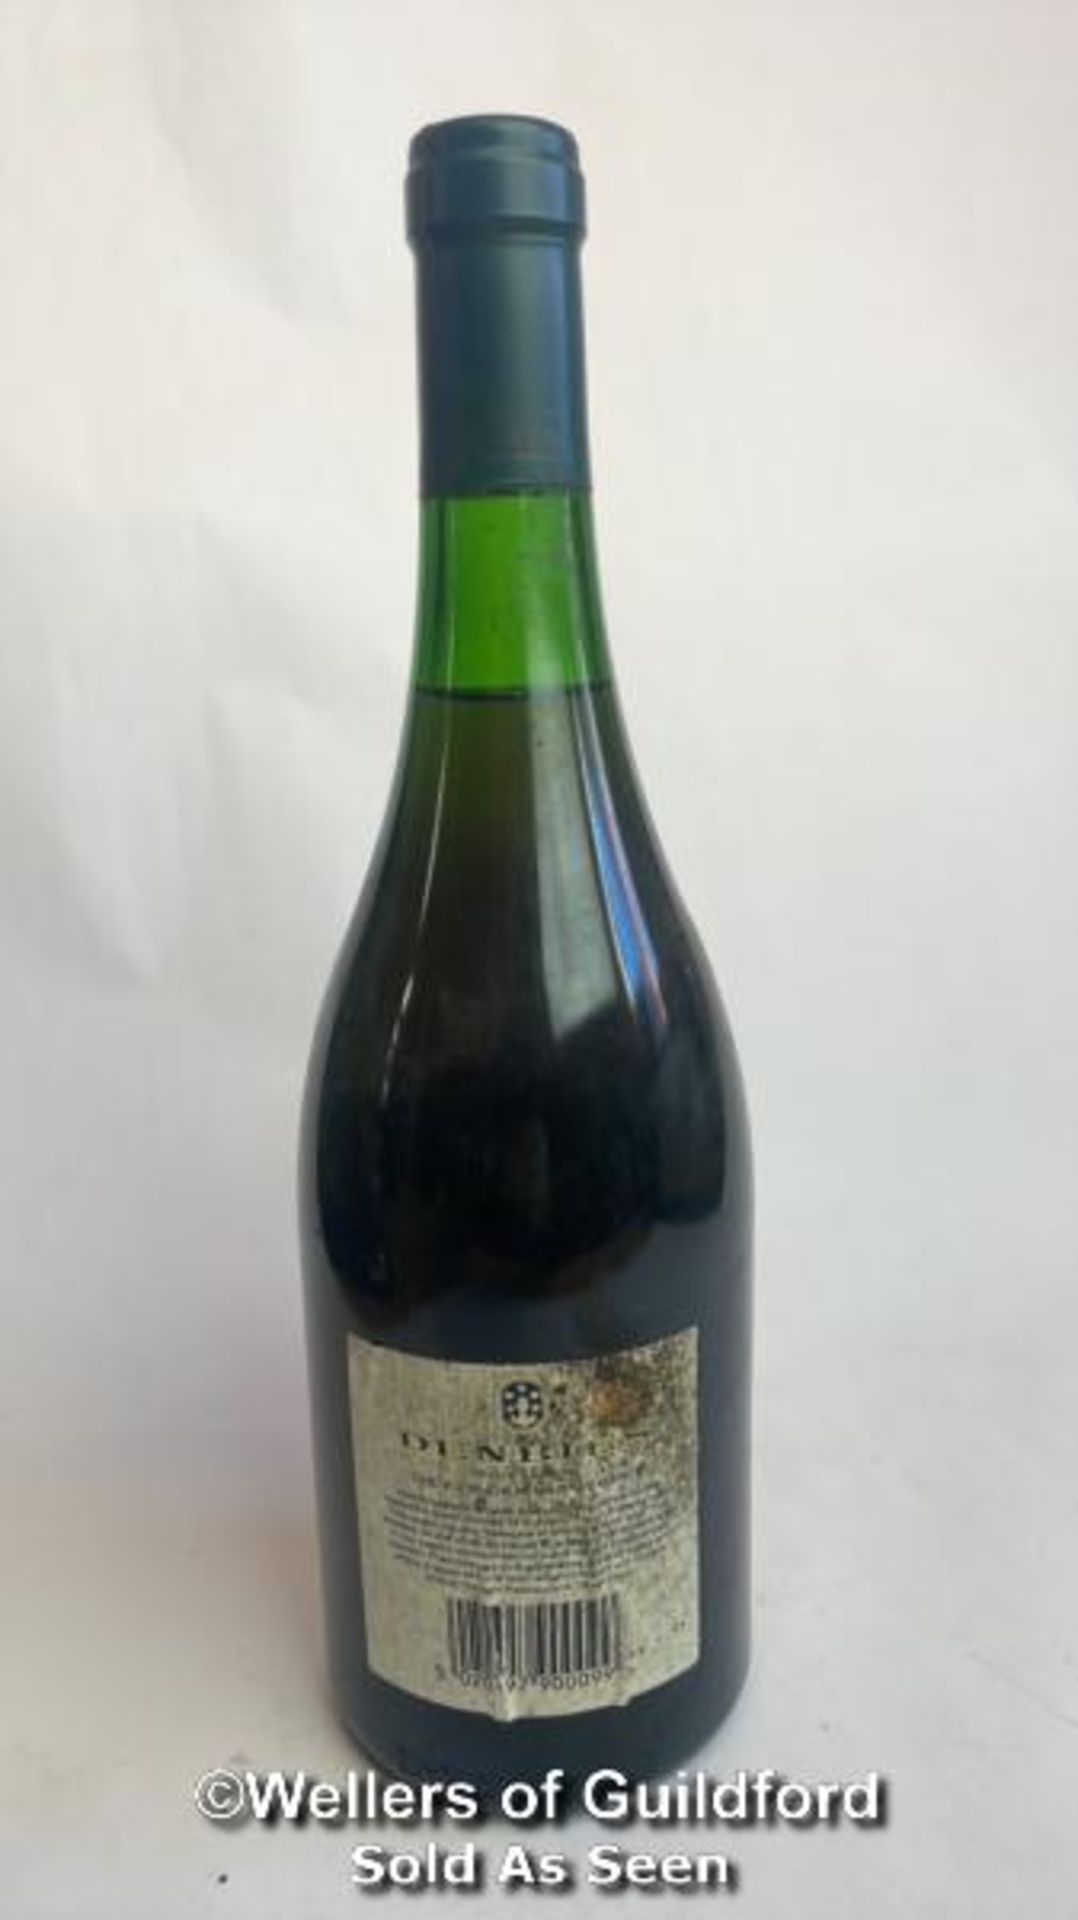 1992 Denbies Pino Gris, 75cl, 10.5% vol / Please see images for fill level and general condition. - Image 3 of 5